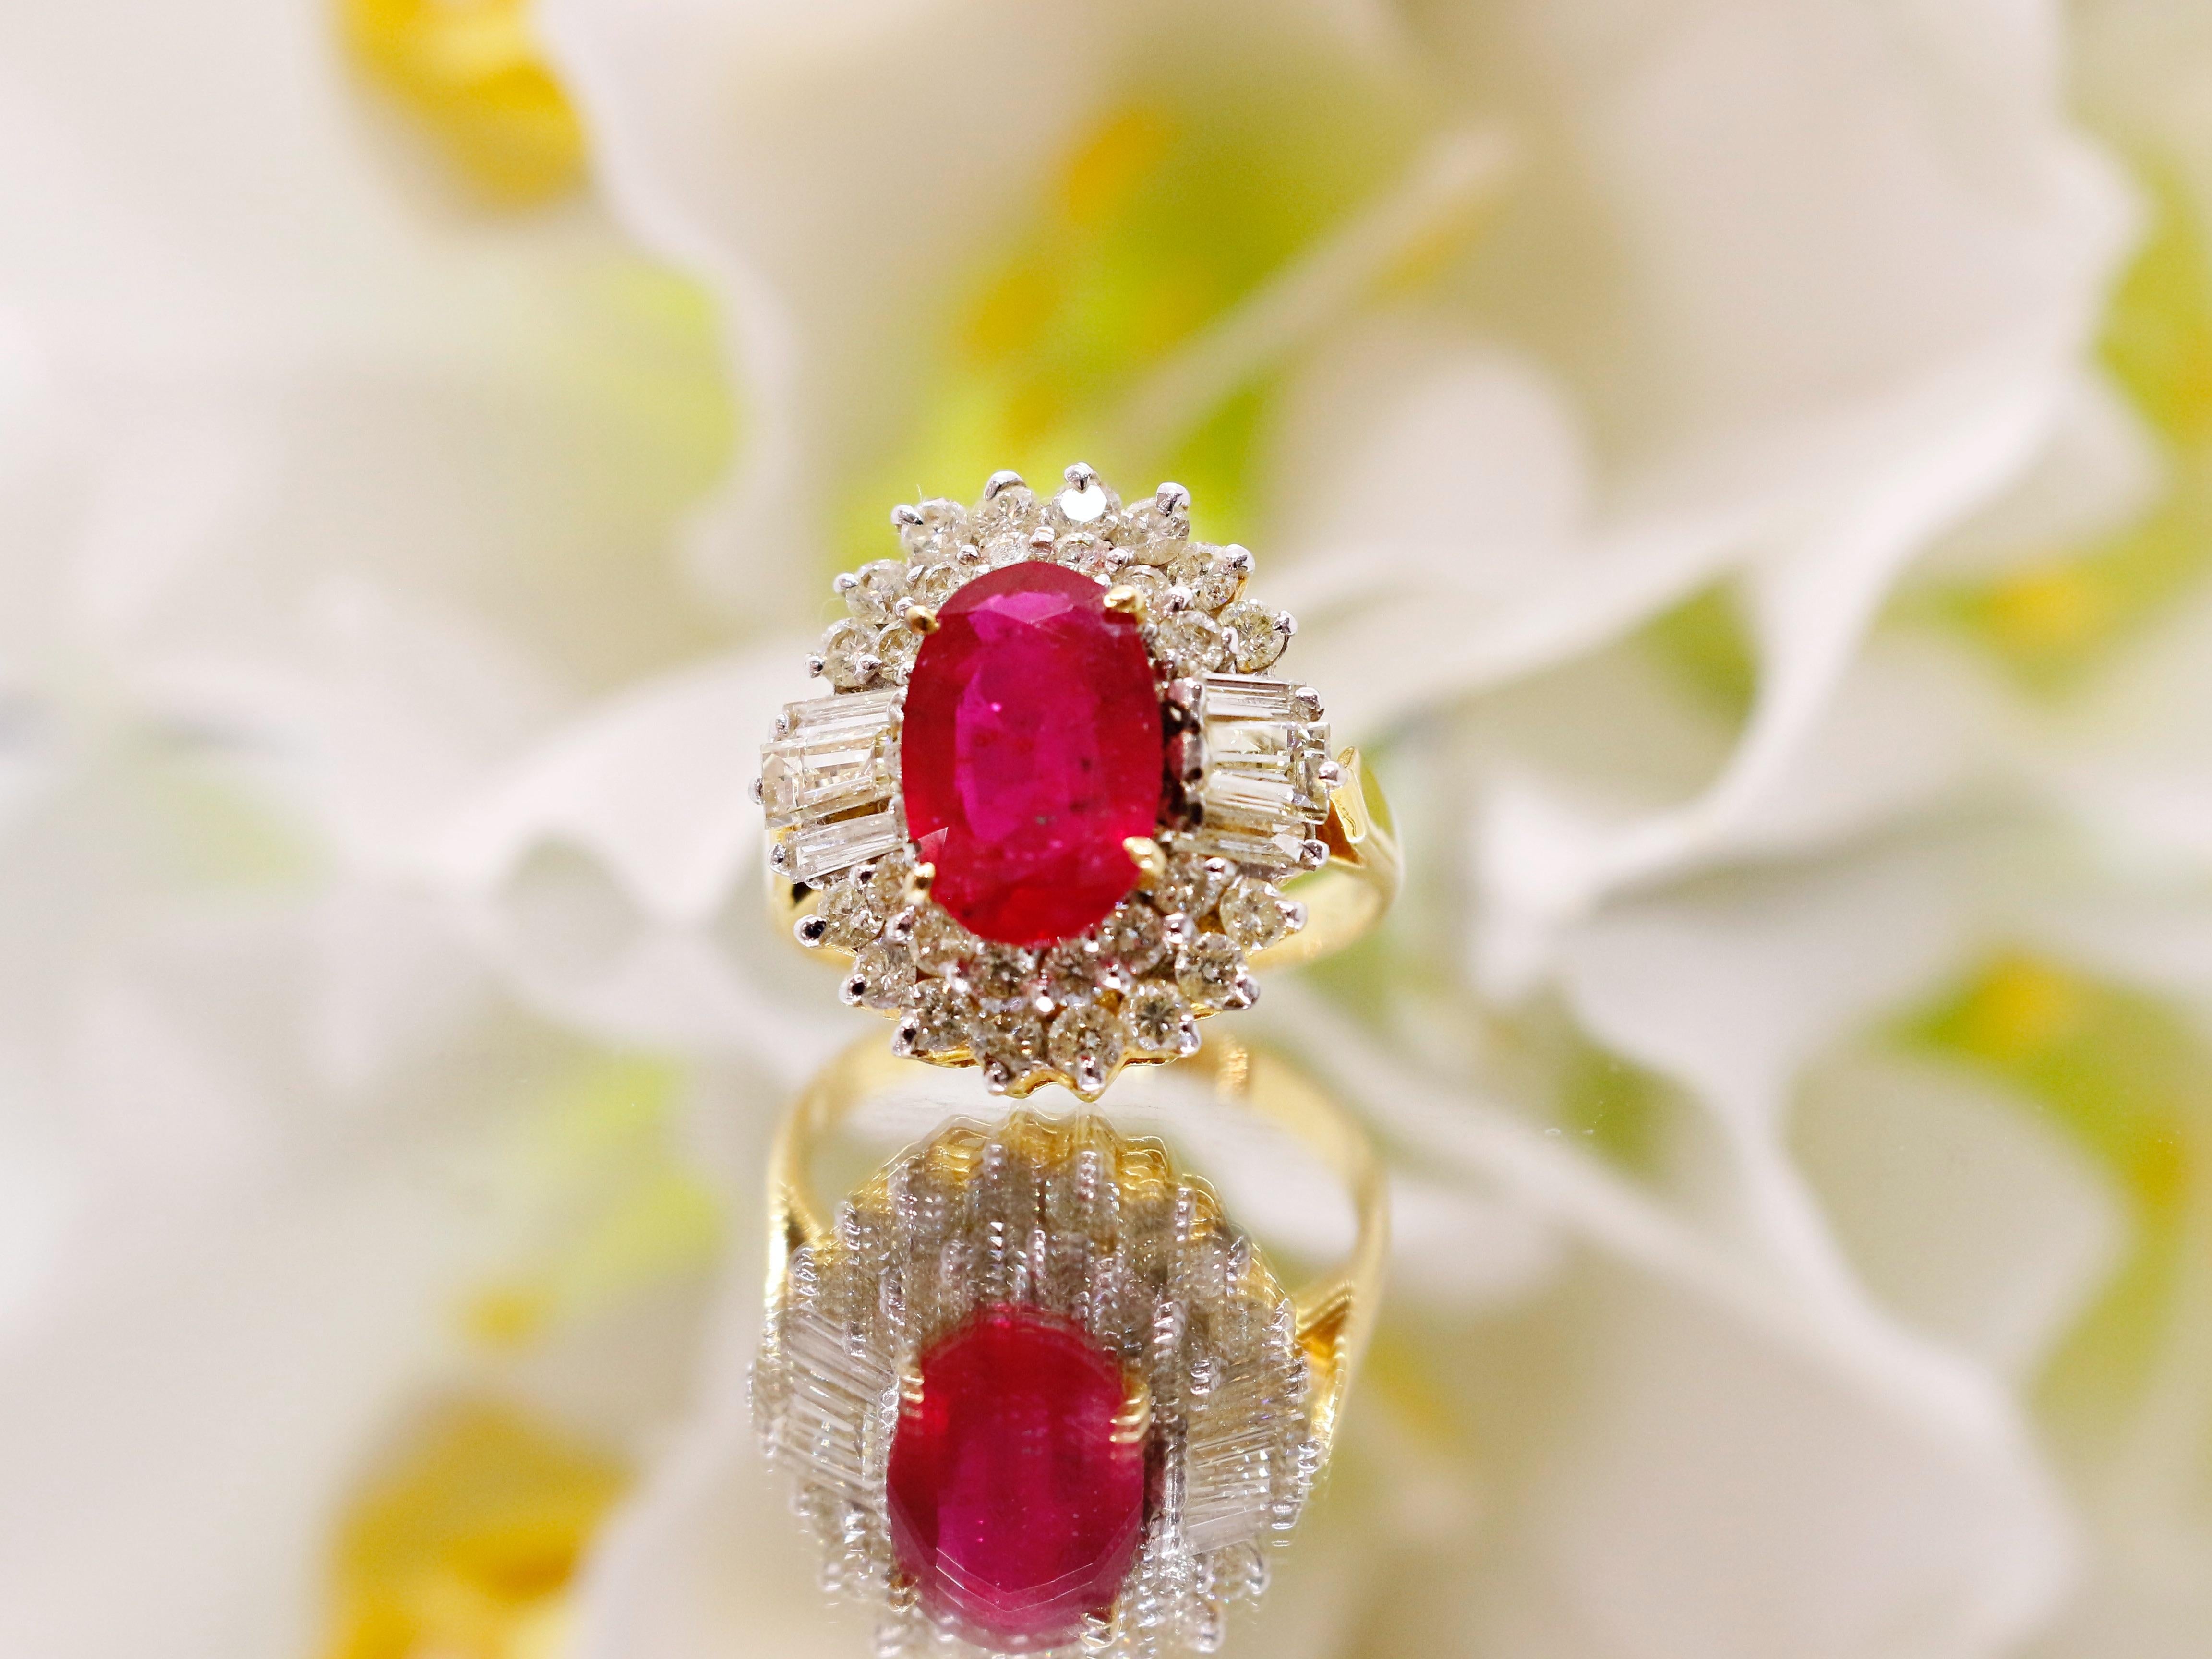 ◆Detail description◆

◆Solid 18kt Gold (shown in picture)

◆Ruby Weight: 3.7 CT

◆Diamond Carat: 1.10 CT

◆Diamond Shape: Round mixed

◆Total Weight: 5.7 Gram